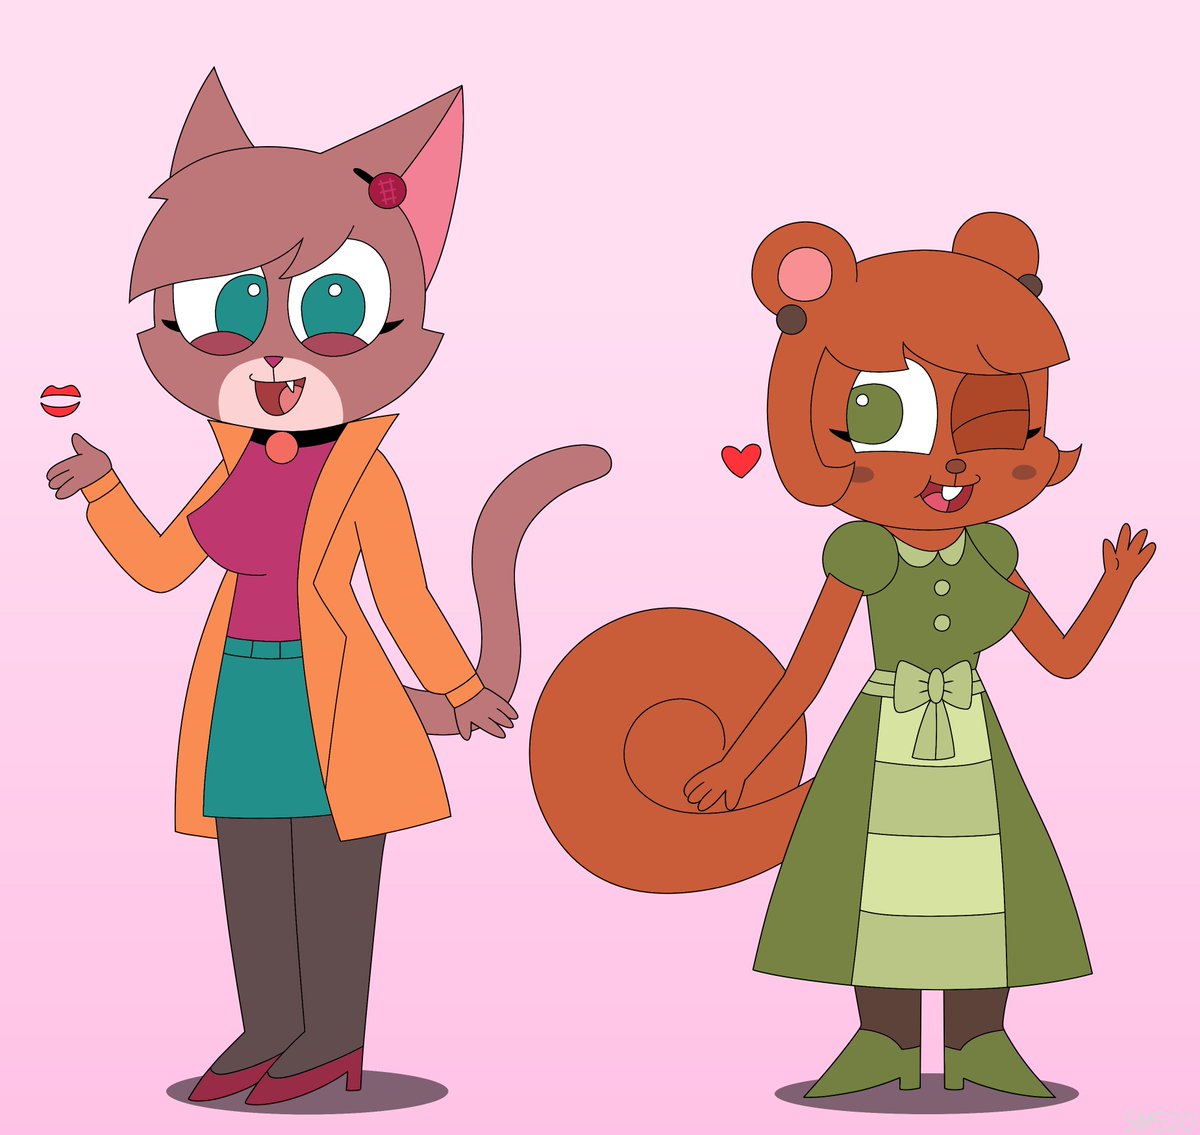 Delia & Meryl for late Mother's Day in USA! Two of them by @ajmarekart #murphyandmitzi #fanart #furry #OC #cat #squirrel #MothersDay #MotherDay